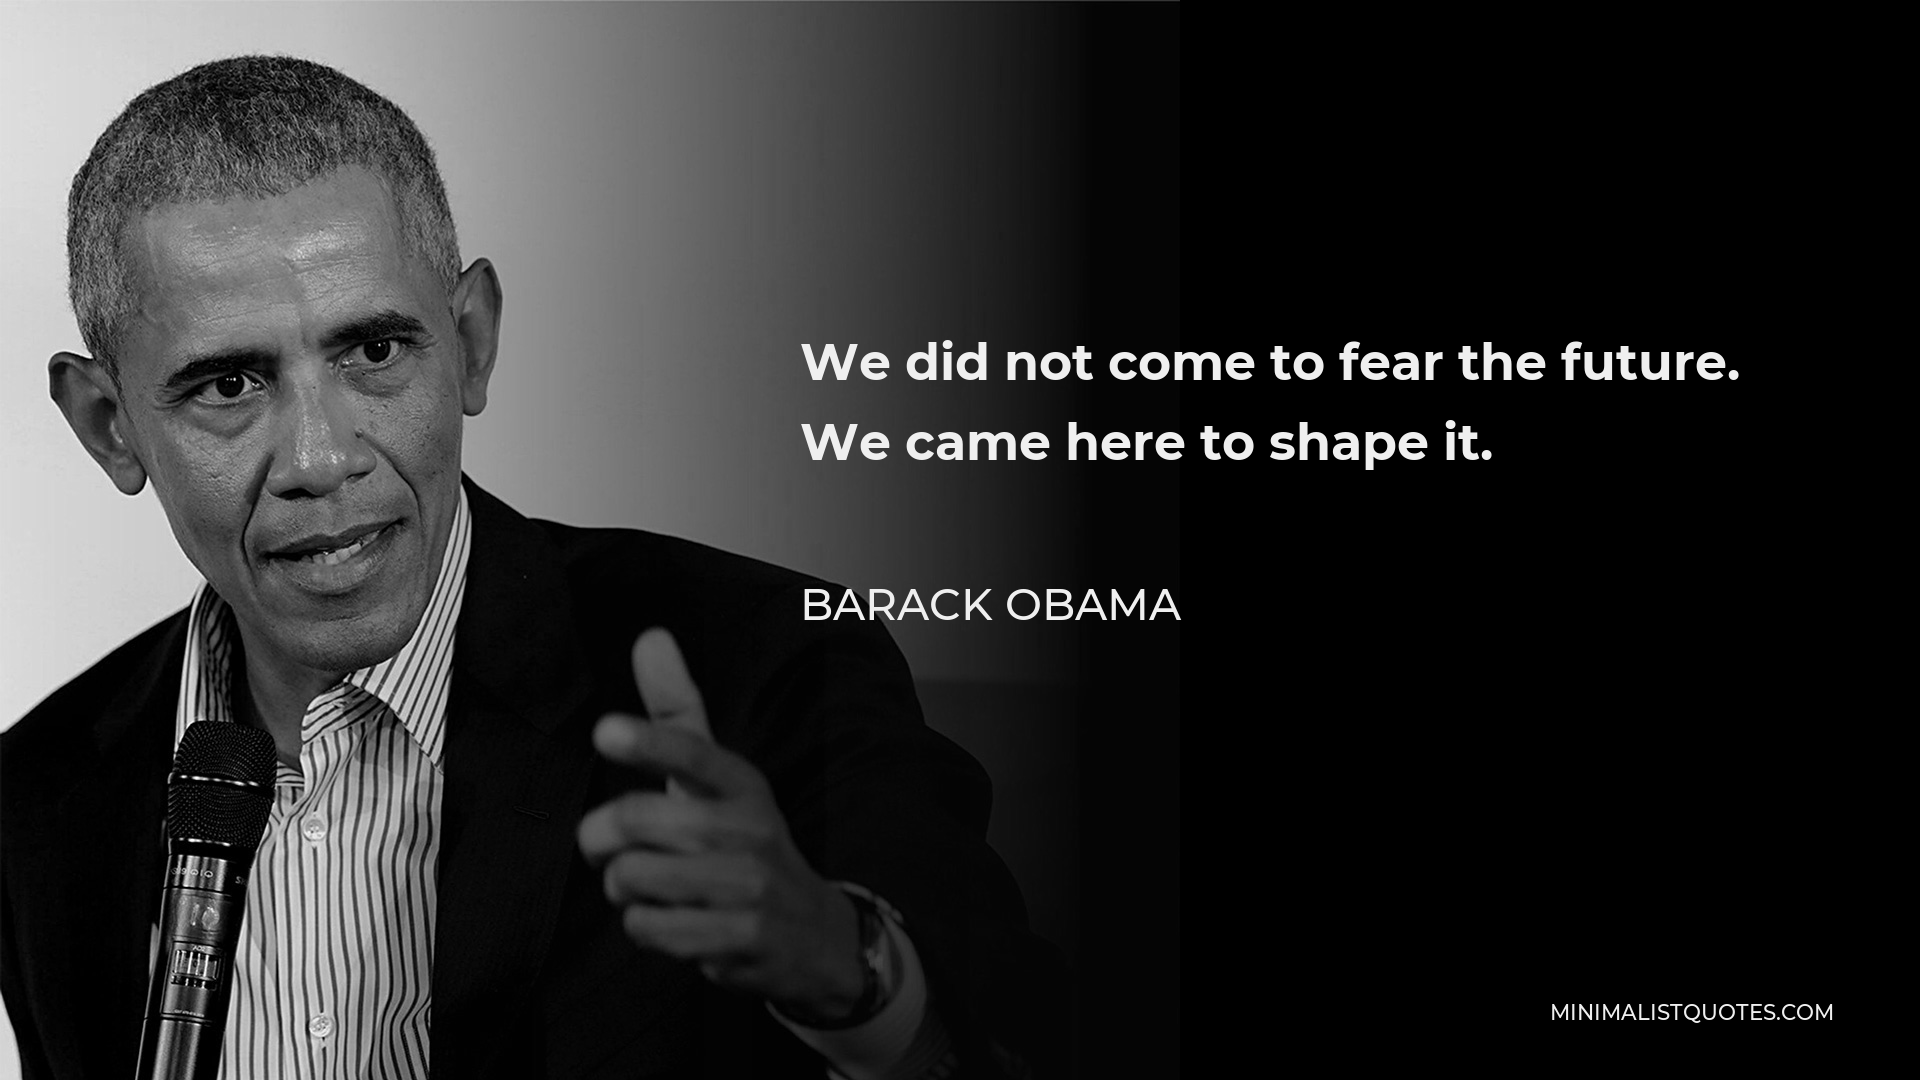 Barack Obama Quote - We did not come to fear the future. We came here to shape it.